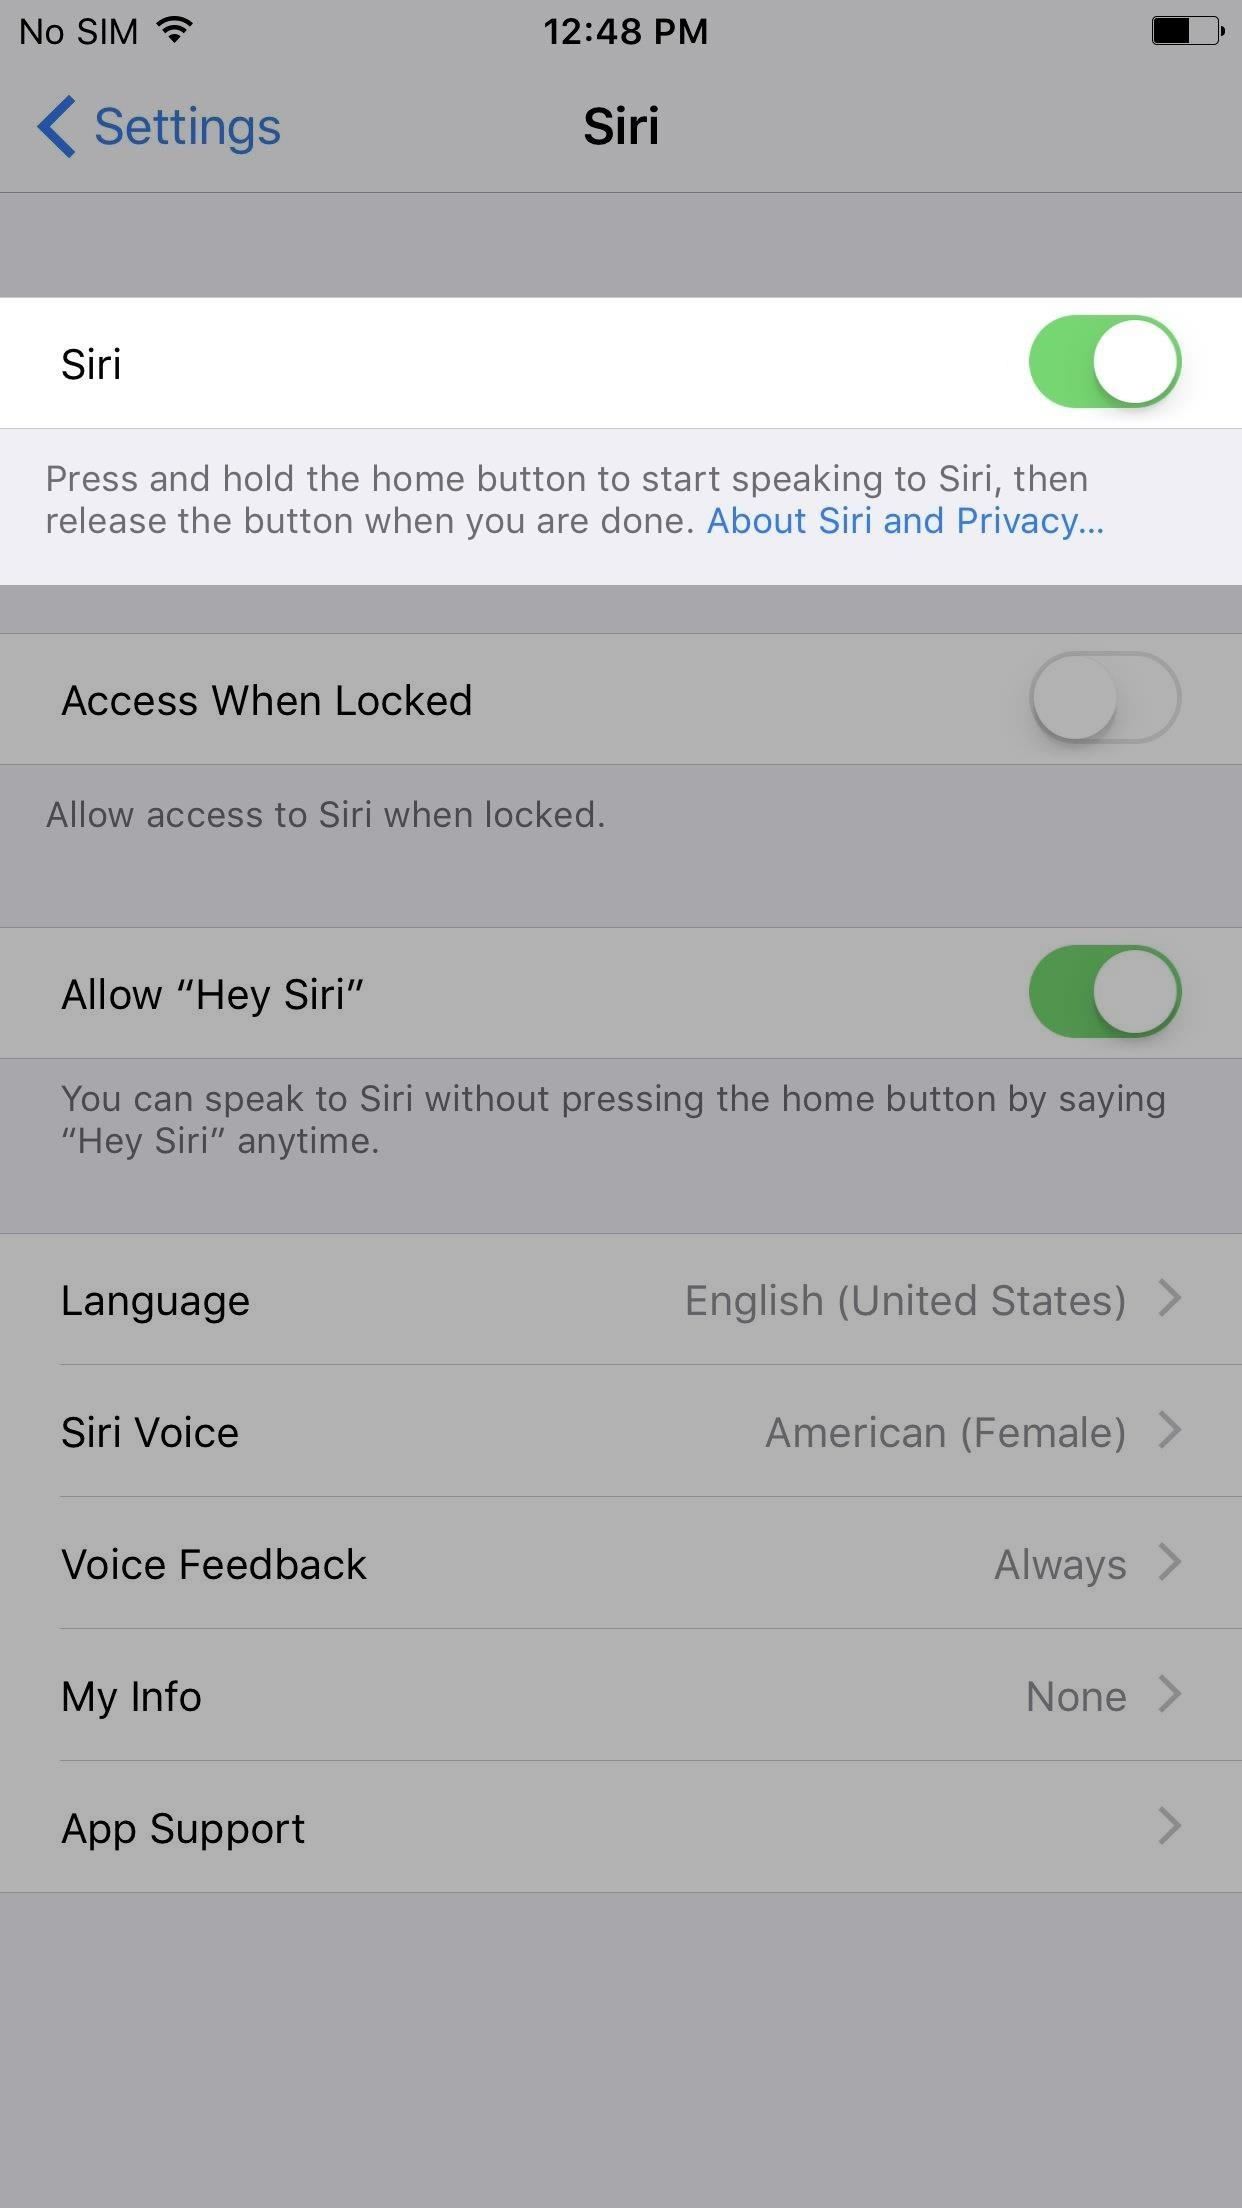 How to Completely Turn Off Siri on Your iPhone